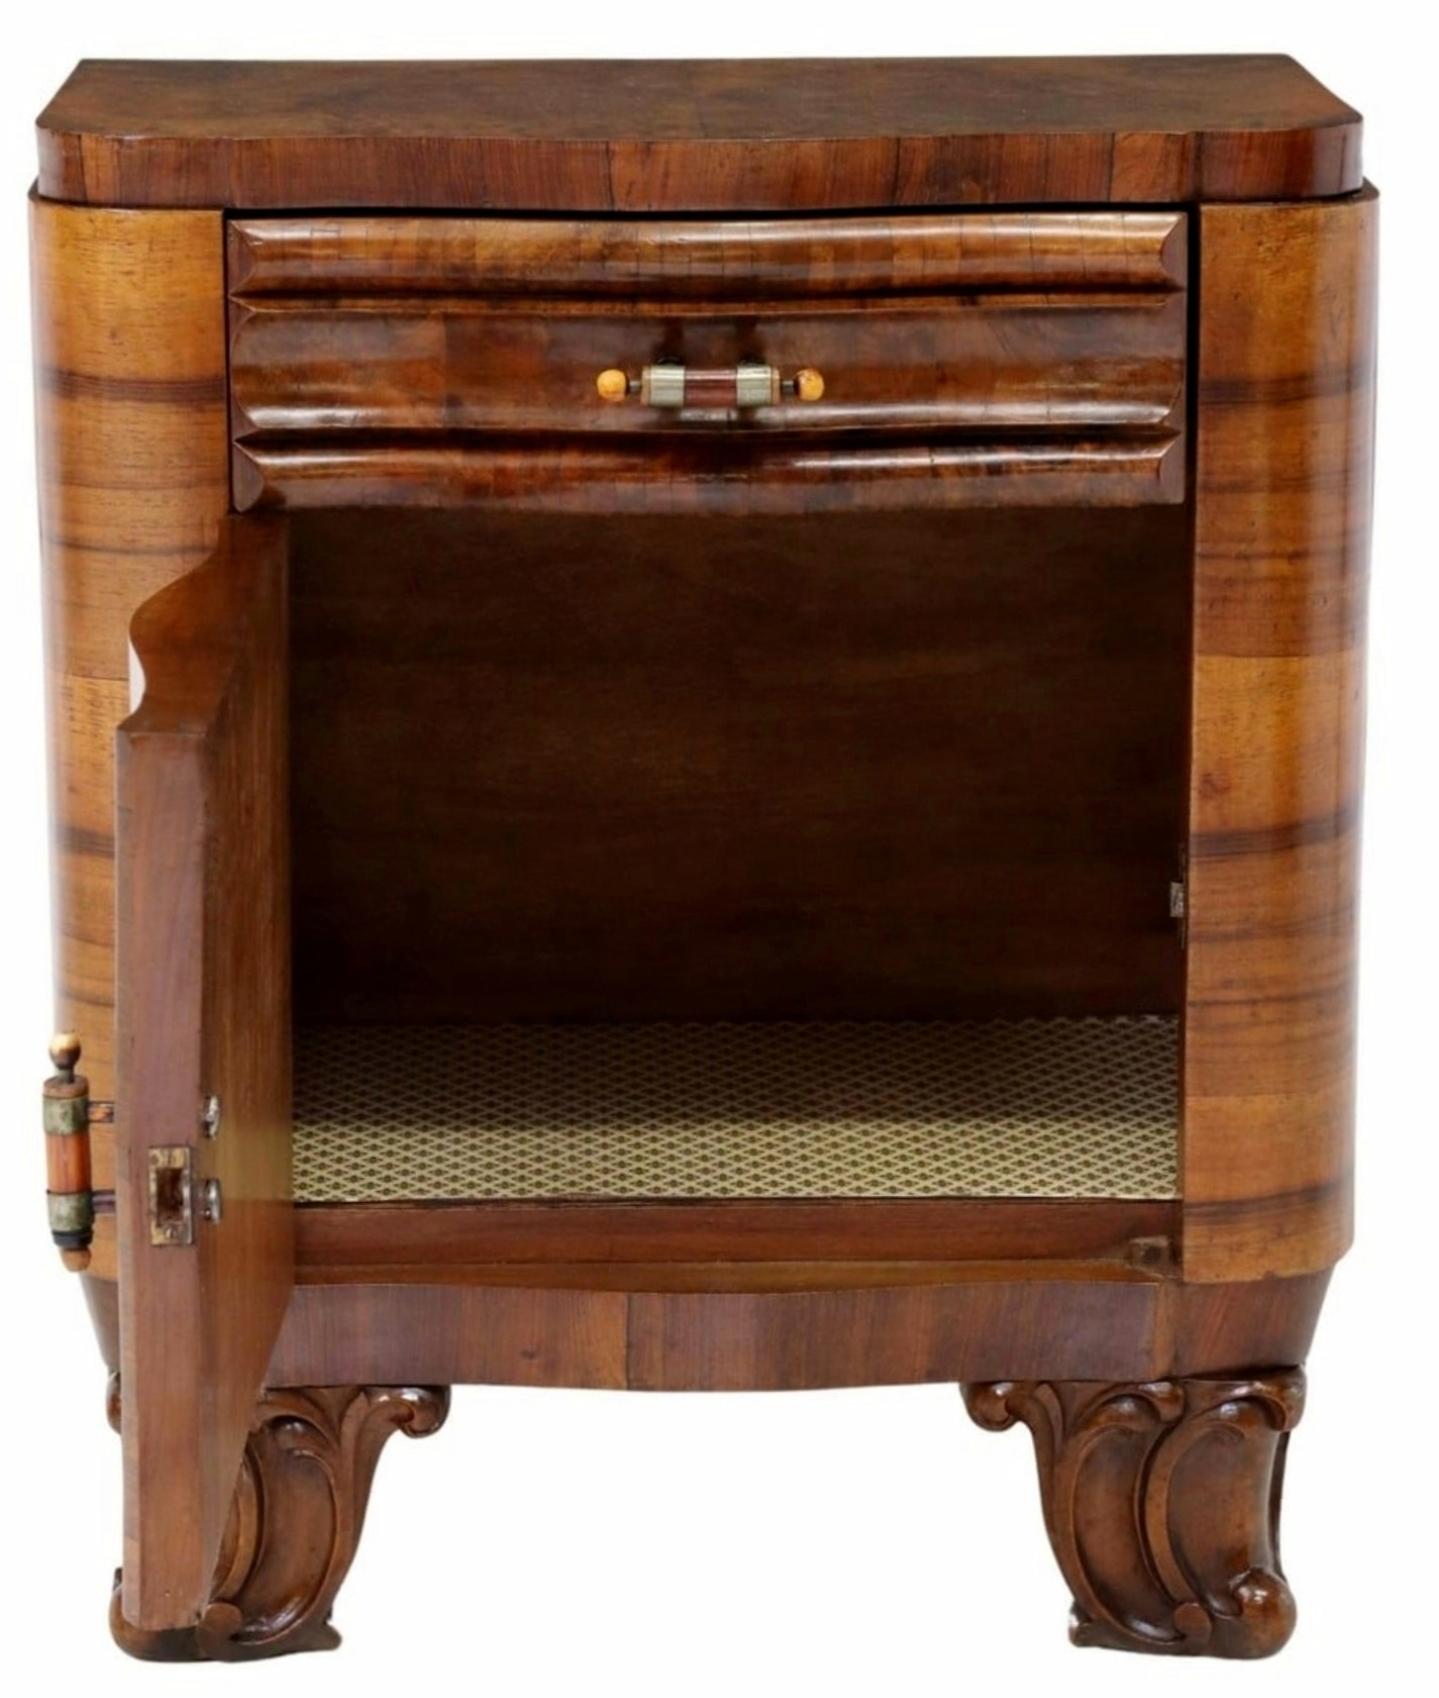 Italian Art Deco Burled Walnut Nightstand by A. Brichetto  In Fair Condition For Sale In Forney, TX